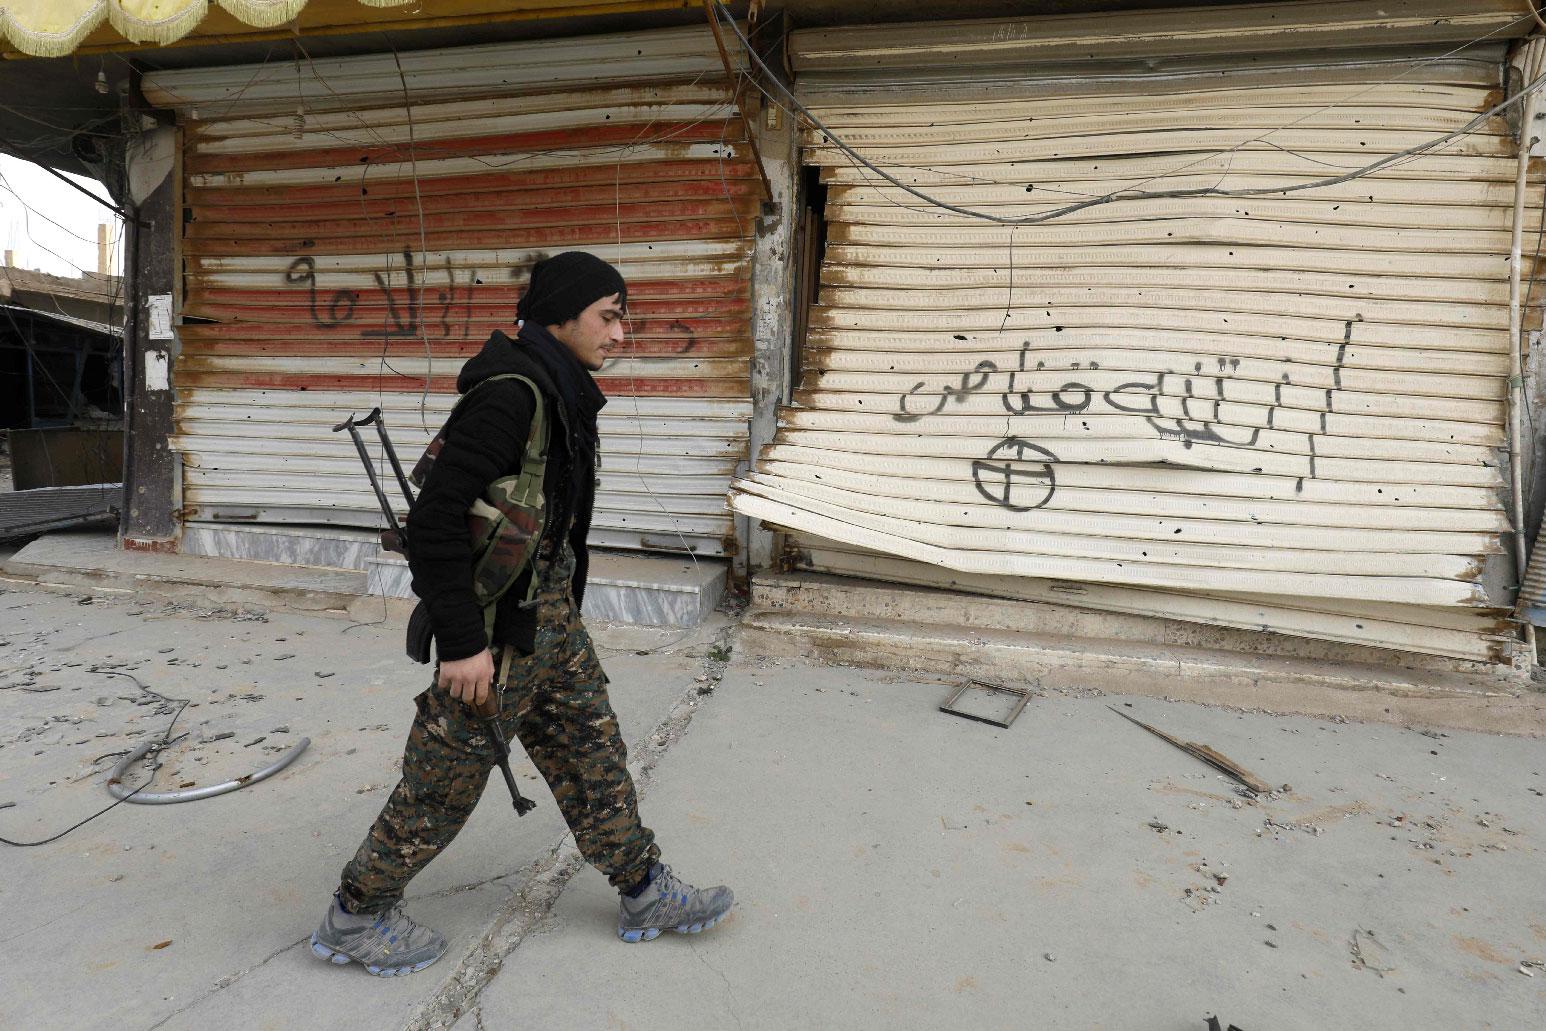 A fighter from the Syrian Democratic Forces (SDF) walks past shops with their fronts painted with the Arabic phrases "beware a sniper" and "caliphate state", in the city of Hajin in Syria's eastern Deir Ezzor province on January 27, 2019.